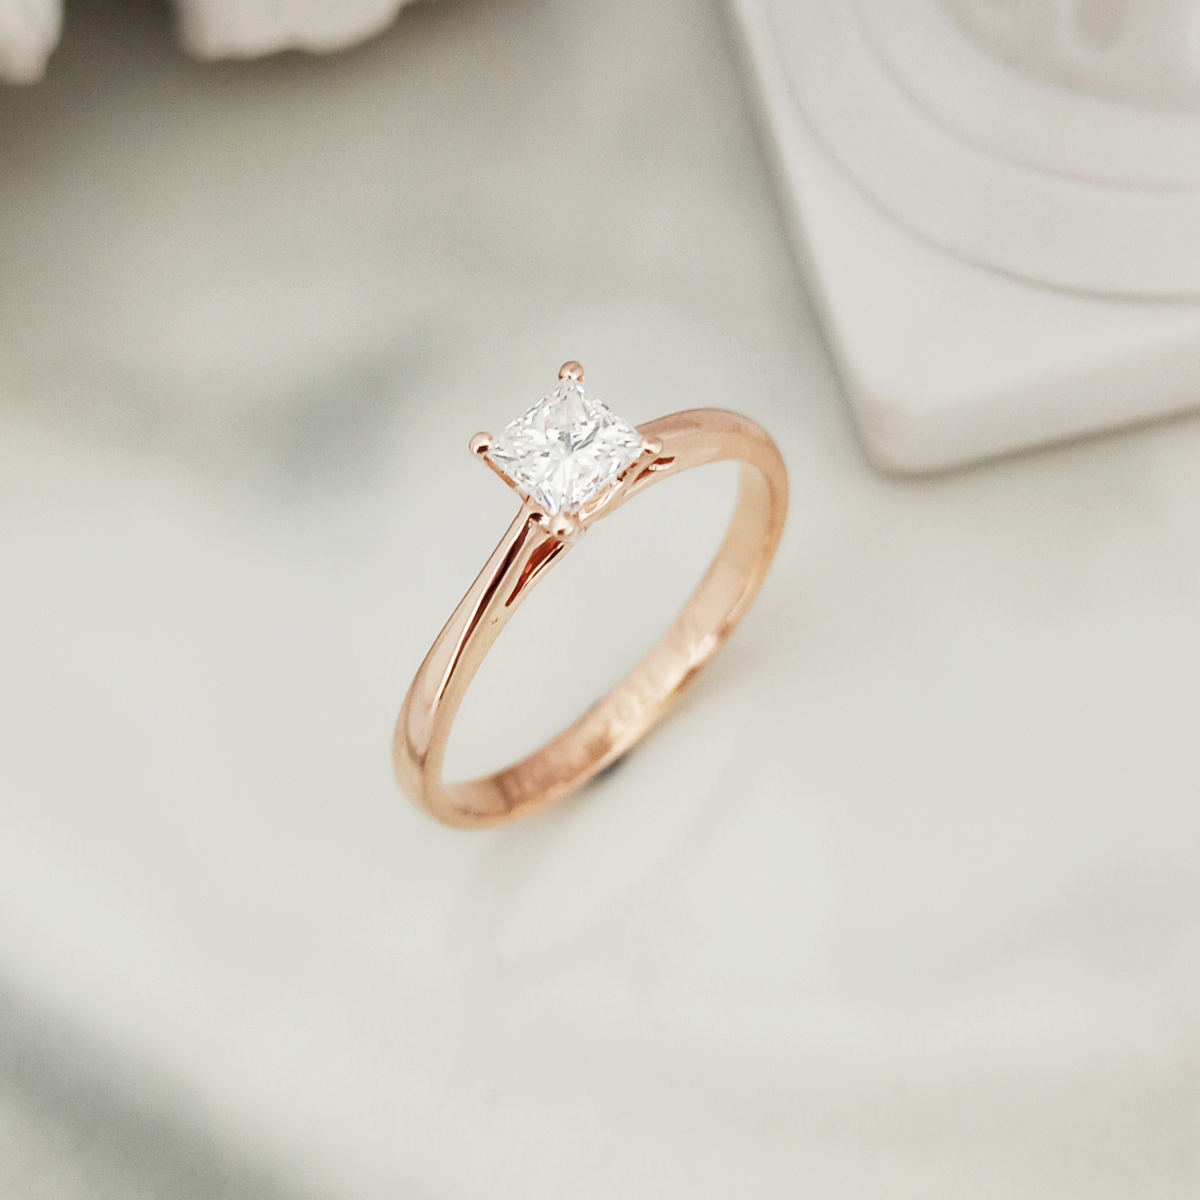 “Pawn Stars” - Can you pawn an 18k rose gold engagement ring?